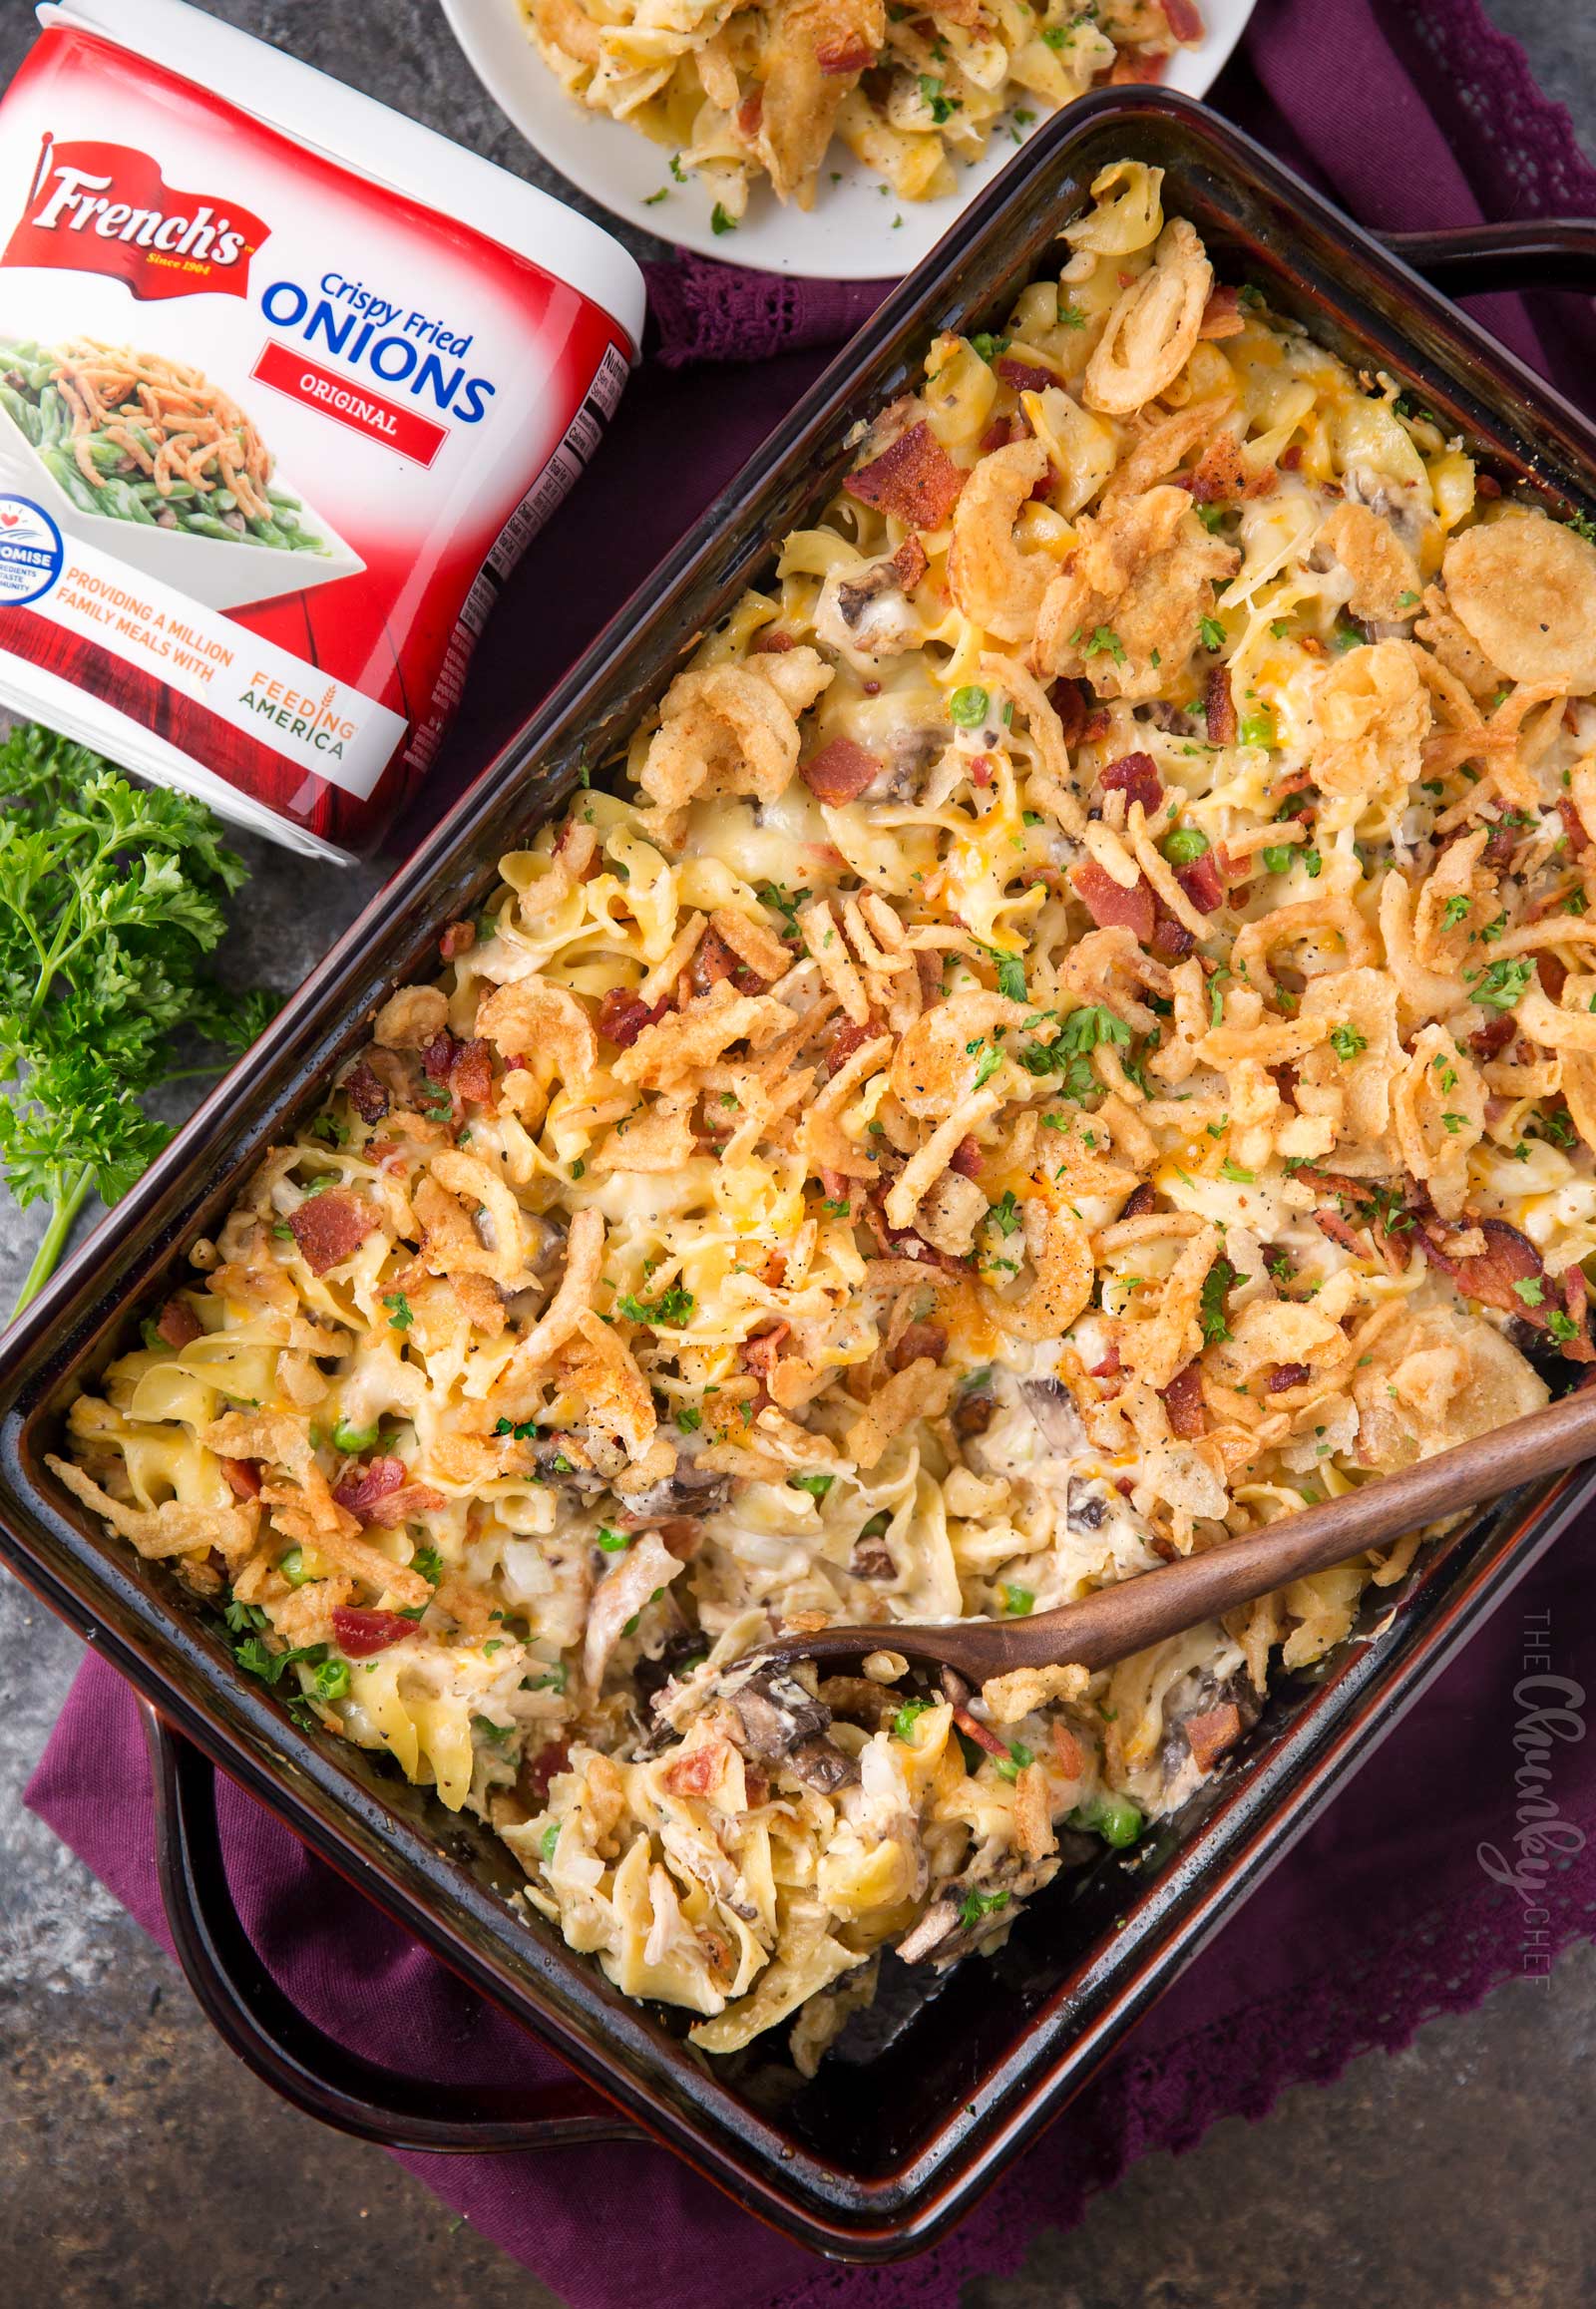 Loaded Cheesy Chicken Noodle Casserole | This chicken noodle casserole has great classic chicken noodle flavors, with some added flavors like bacon, mushrooms, and a crunchy fried onion topping!  Great for a make-ahead meal, this casserole will be family favorite! | The Chunky Chef | #chickennoodle #chickencasserole #casserole #makeahead #comfortfoods #weeknightmeals